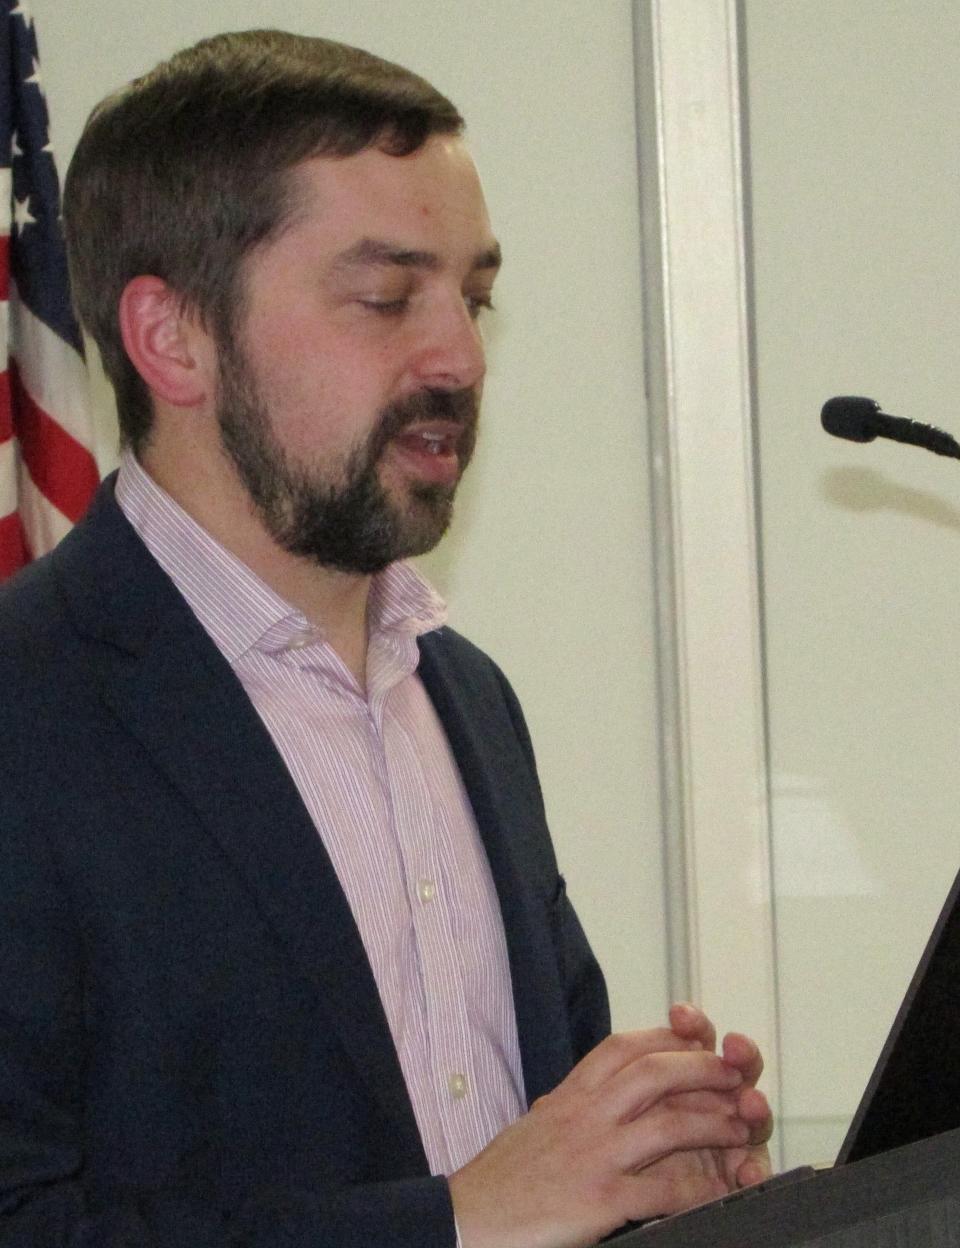 Cape Cod Commission Deputy Director Steven Tupper introduces Bourne residents to a workshop Nov. 13 in Buzzards Bay, exploring the town’s digital equity planning.